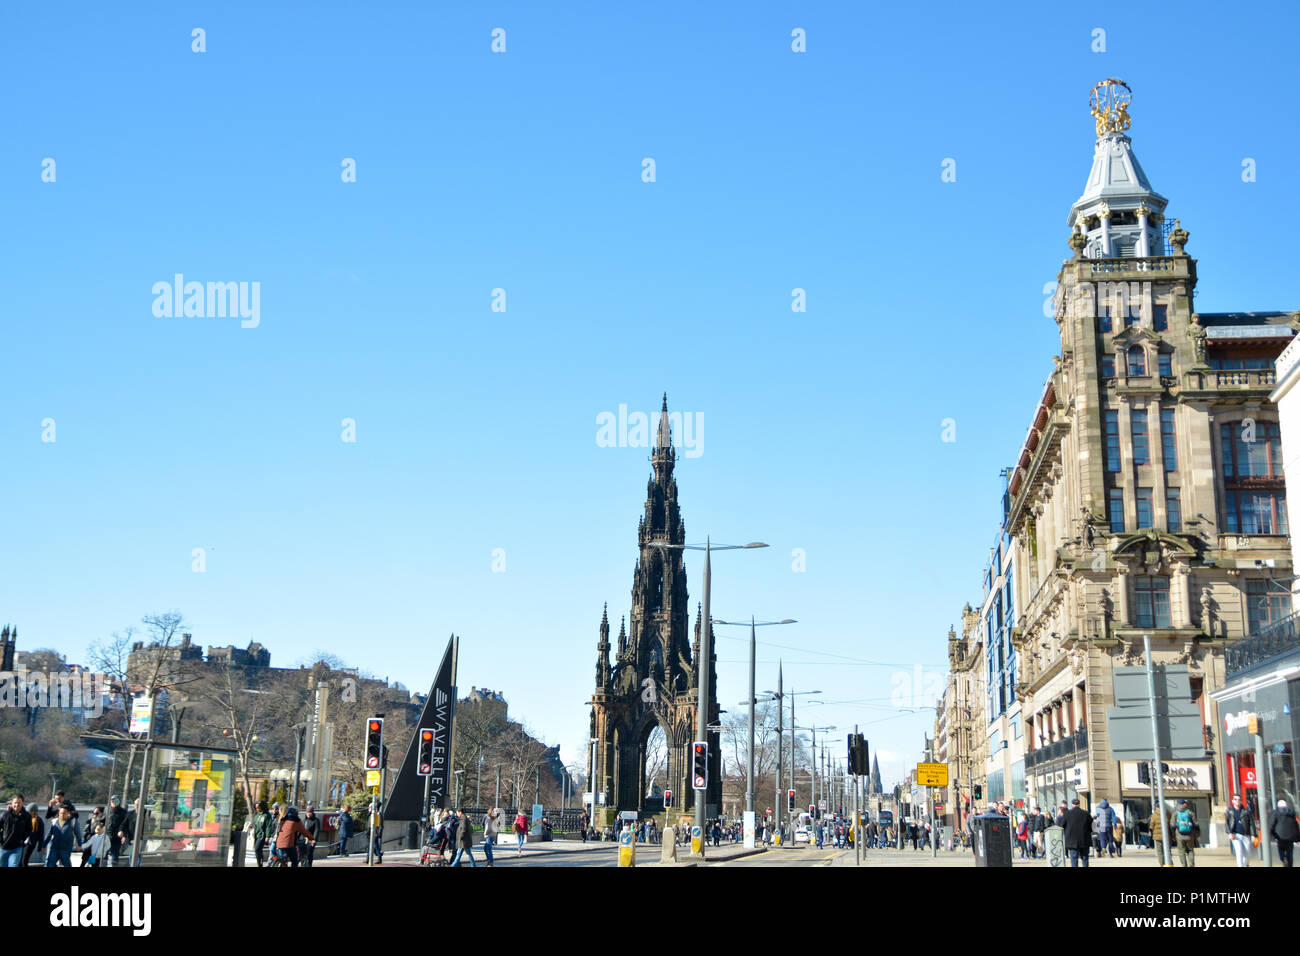 A view of Princes Street basking in sunshine with the Scott Monument in the distance as well as Jenners on the right hand side. Edinburgh, Scotland Stock Photo